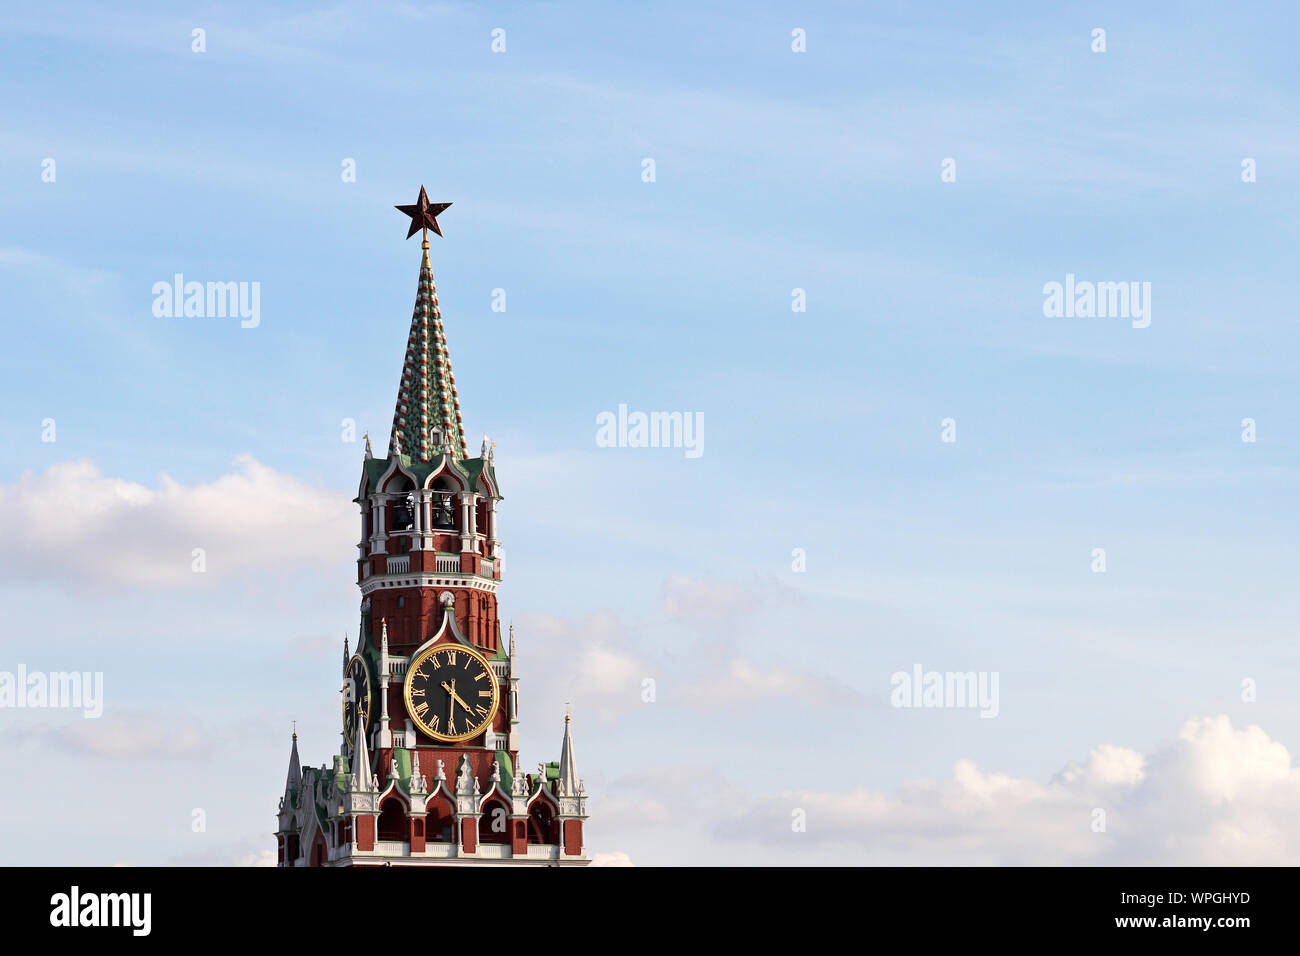 Chimes of Spasskaya tower, symbol of Russia on Red Square. Red star on Moscow Kremlin tower against blue sky with clouds Stock Photo